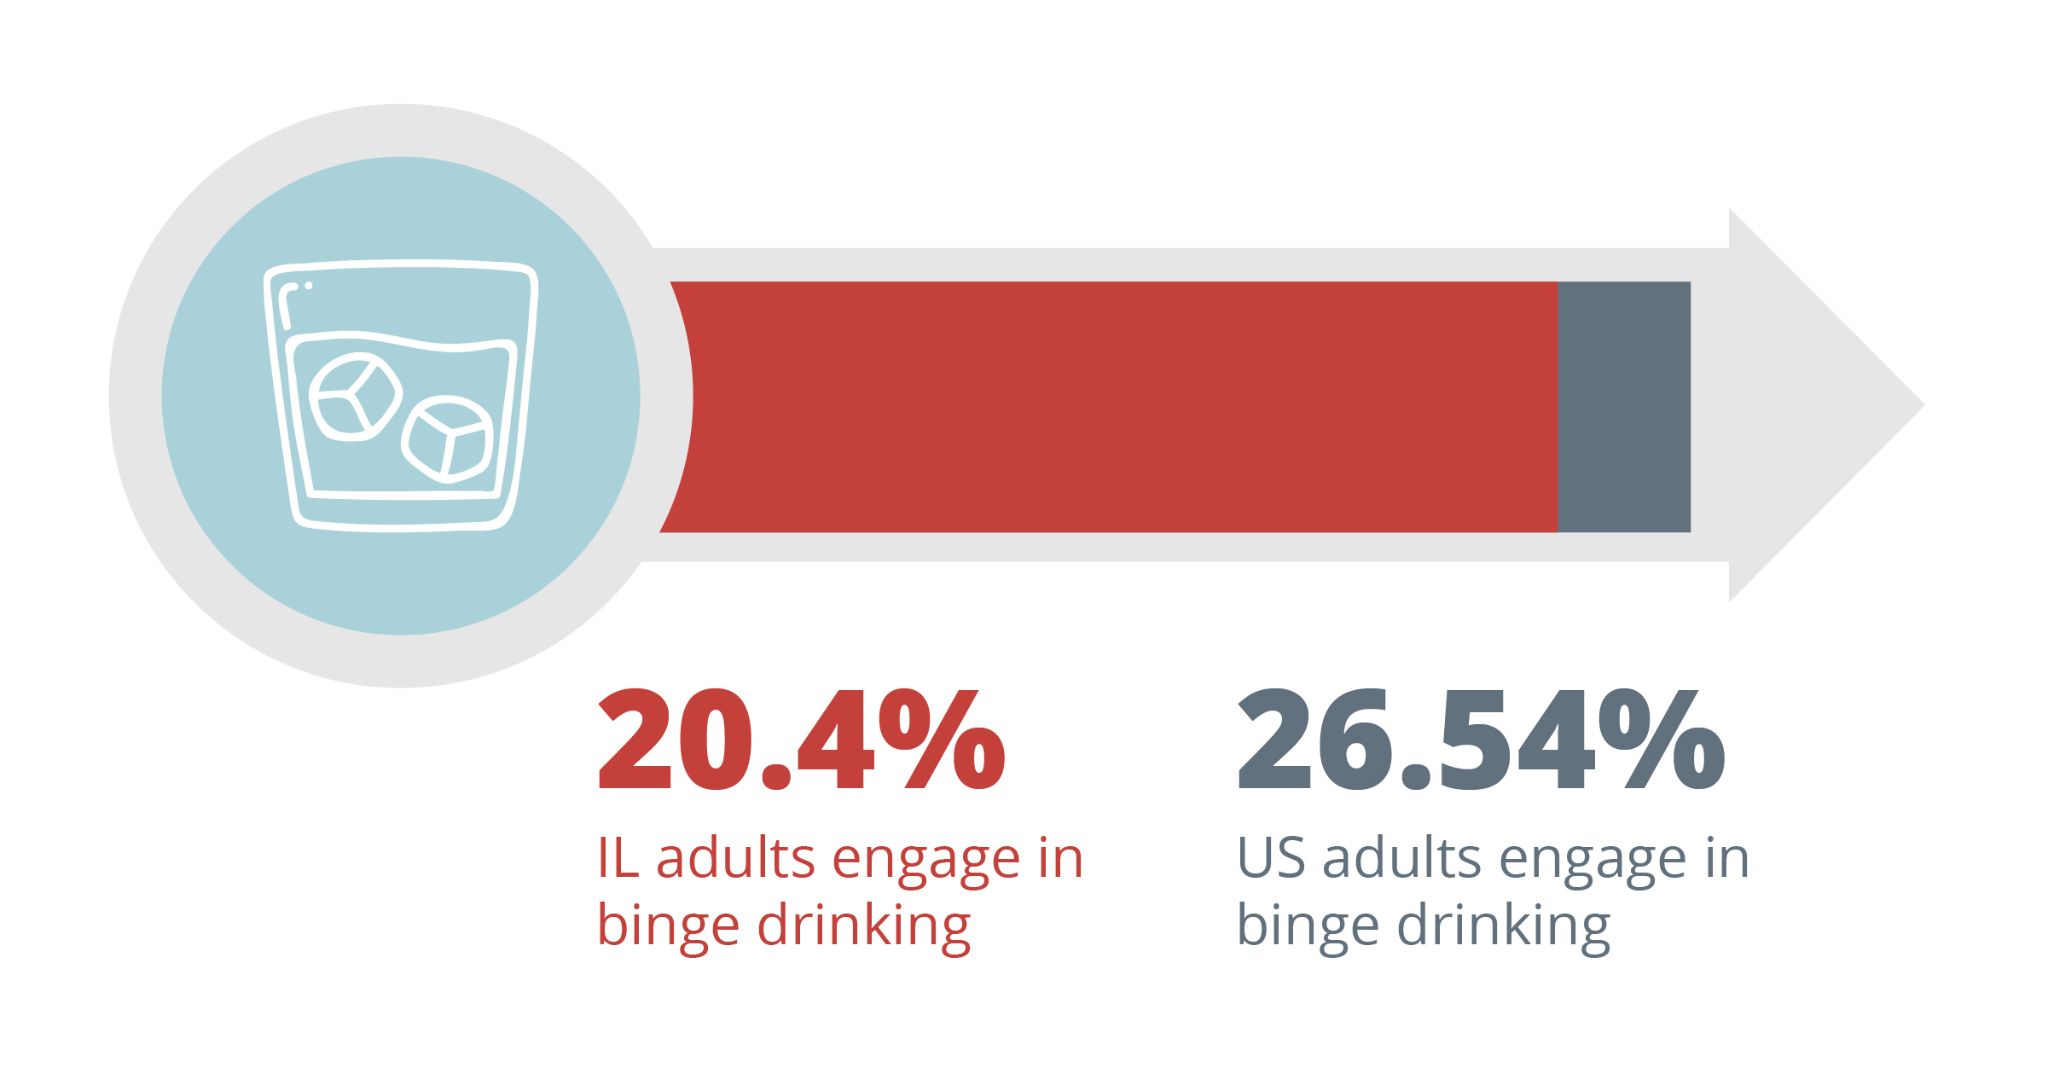 20.4% of illinois adults engage in binge drinking. 26.54% of American adults engage in binge drinking.